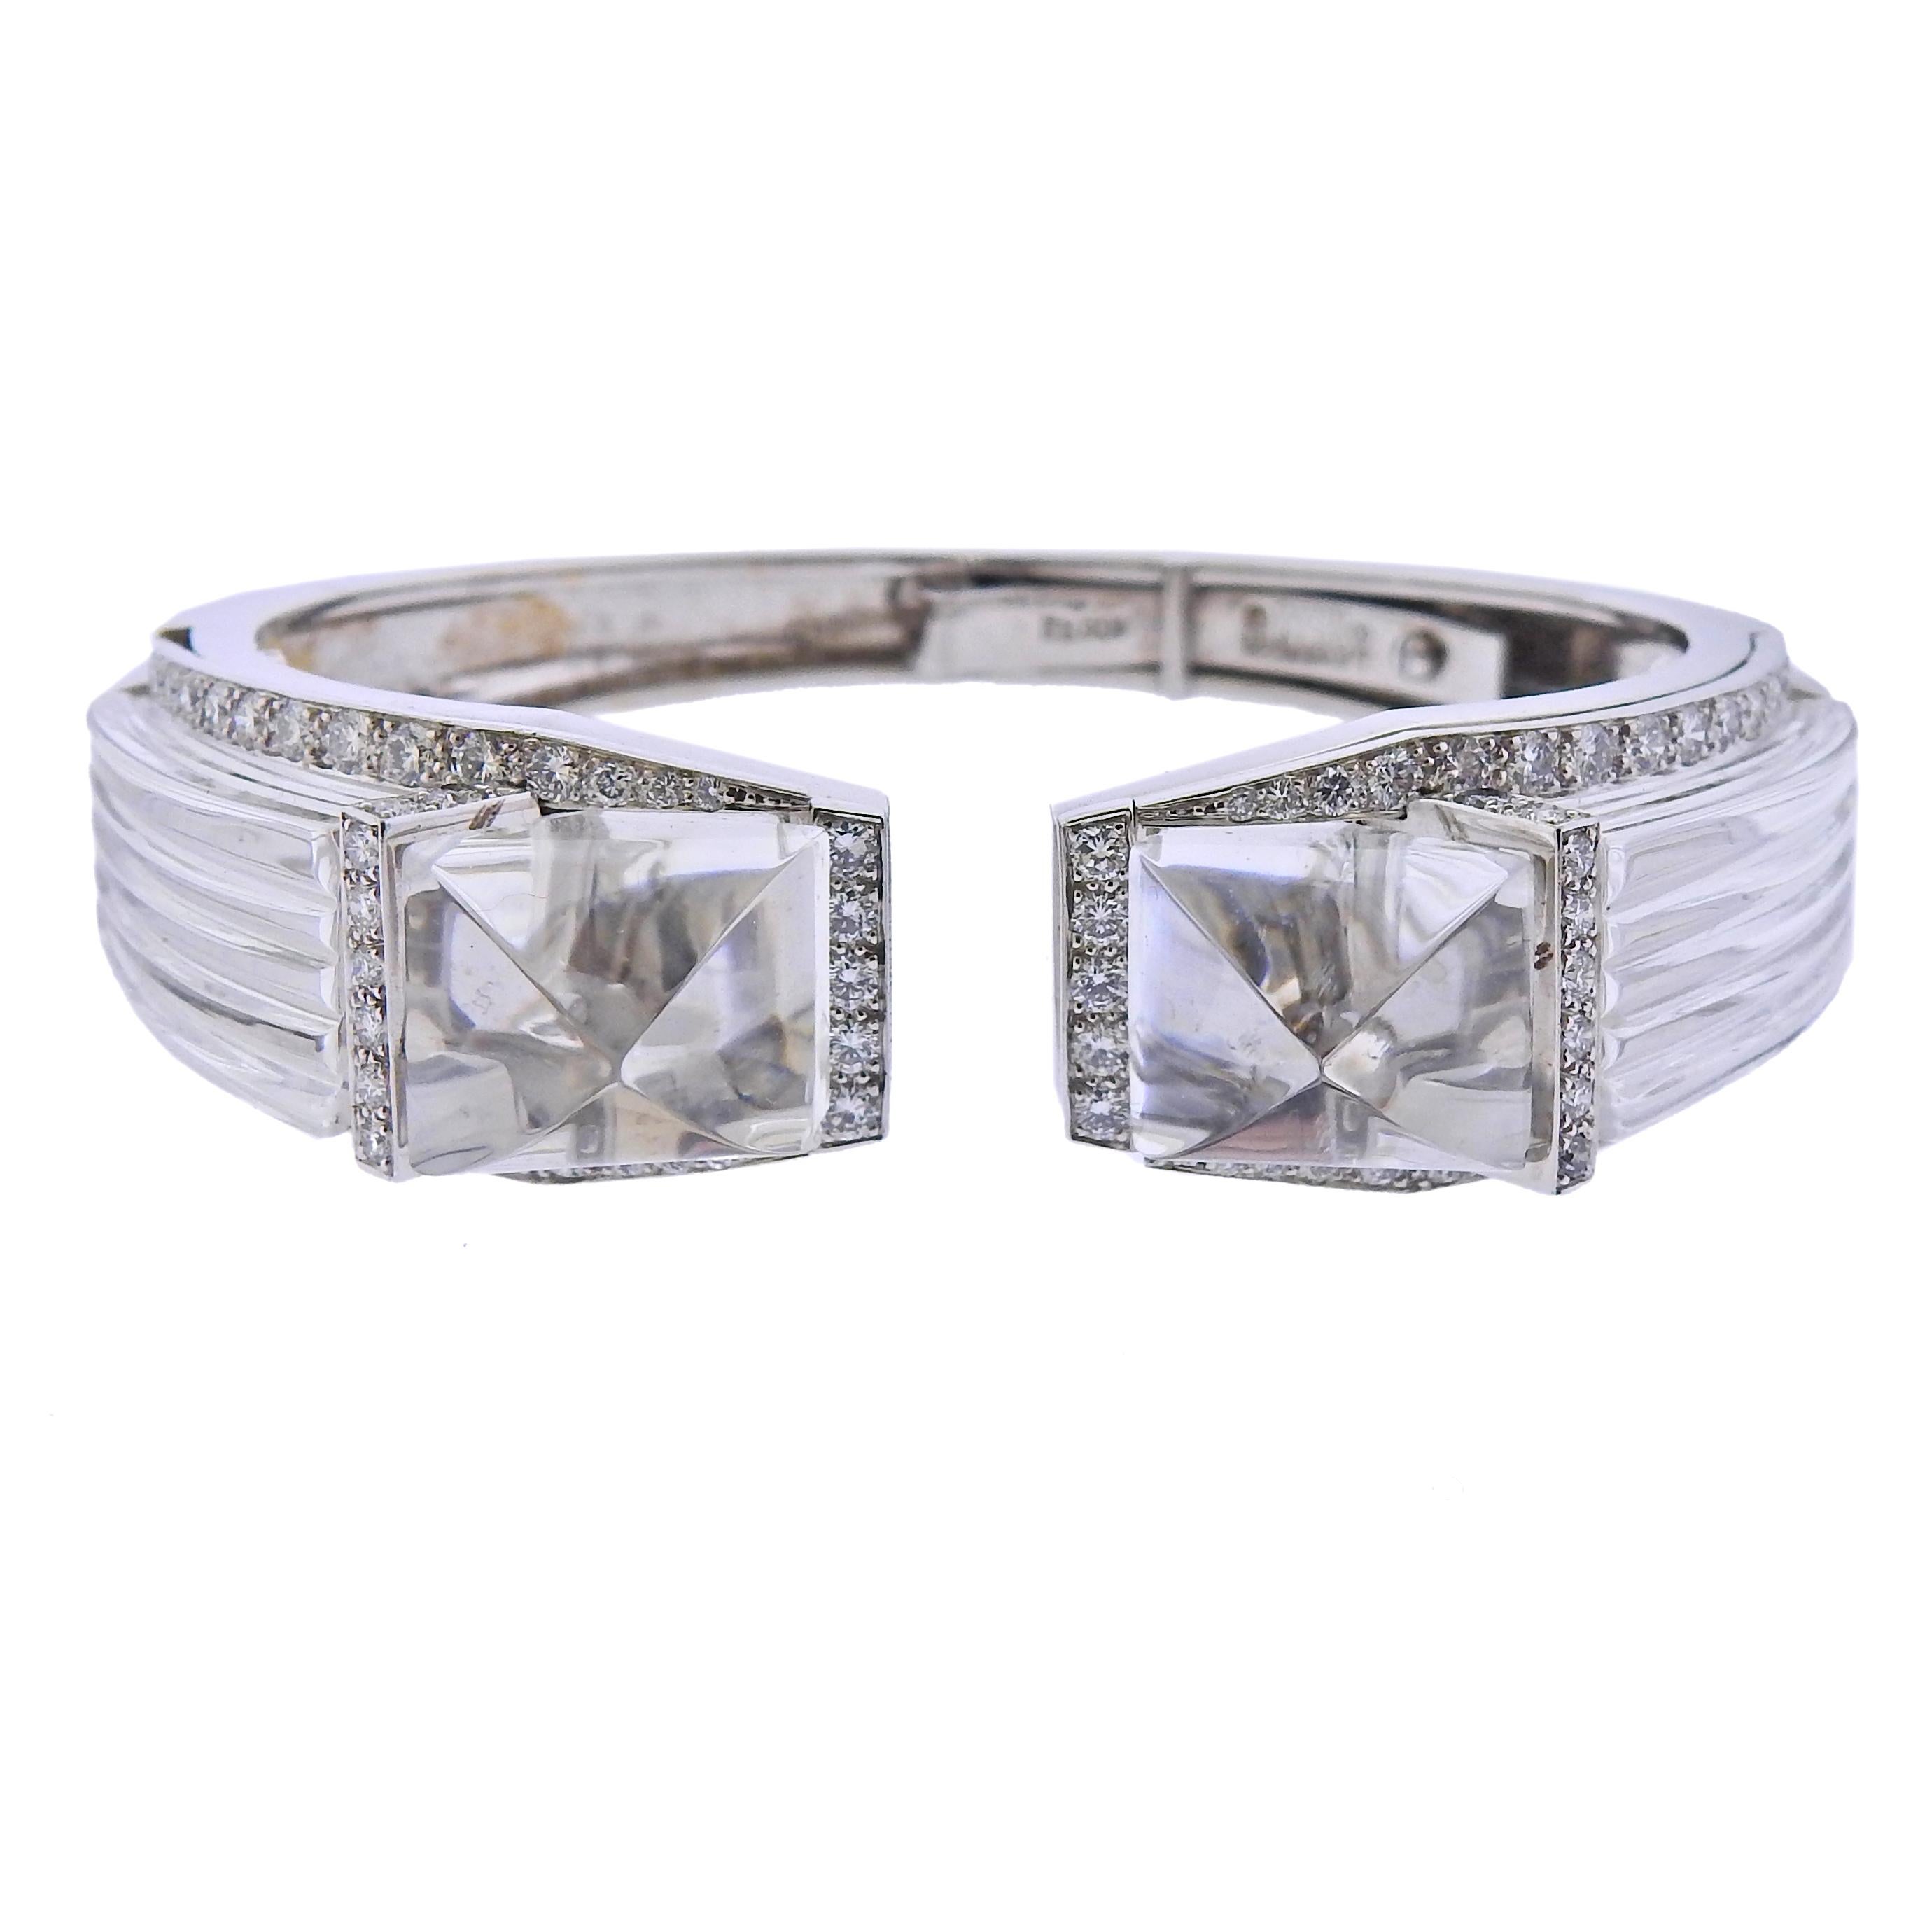 18k gold and platinum White Night cuff bracelet by David Webb, with carved rock crystal and approx. 1.70cts in H/VS-SI1 diamonds. Cuff will fit approx. 6.75-7